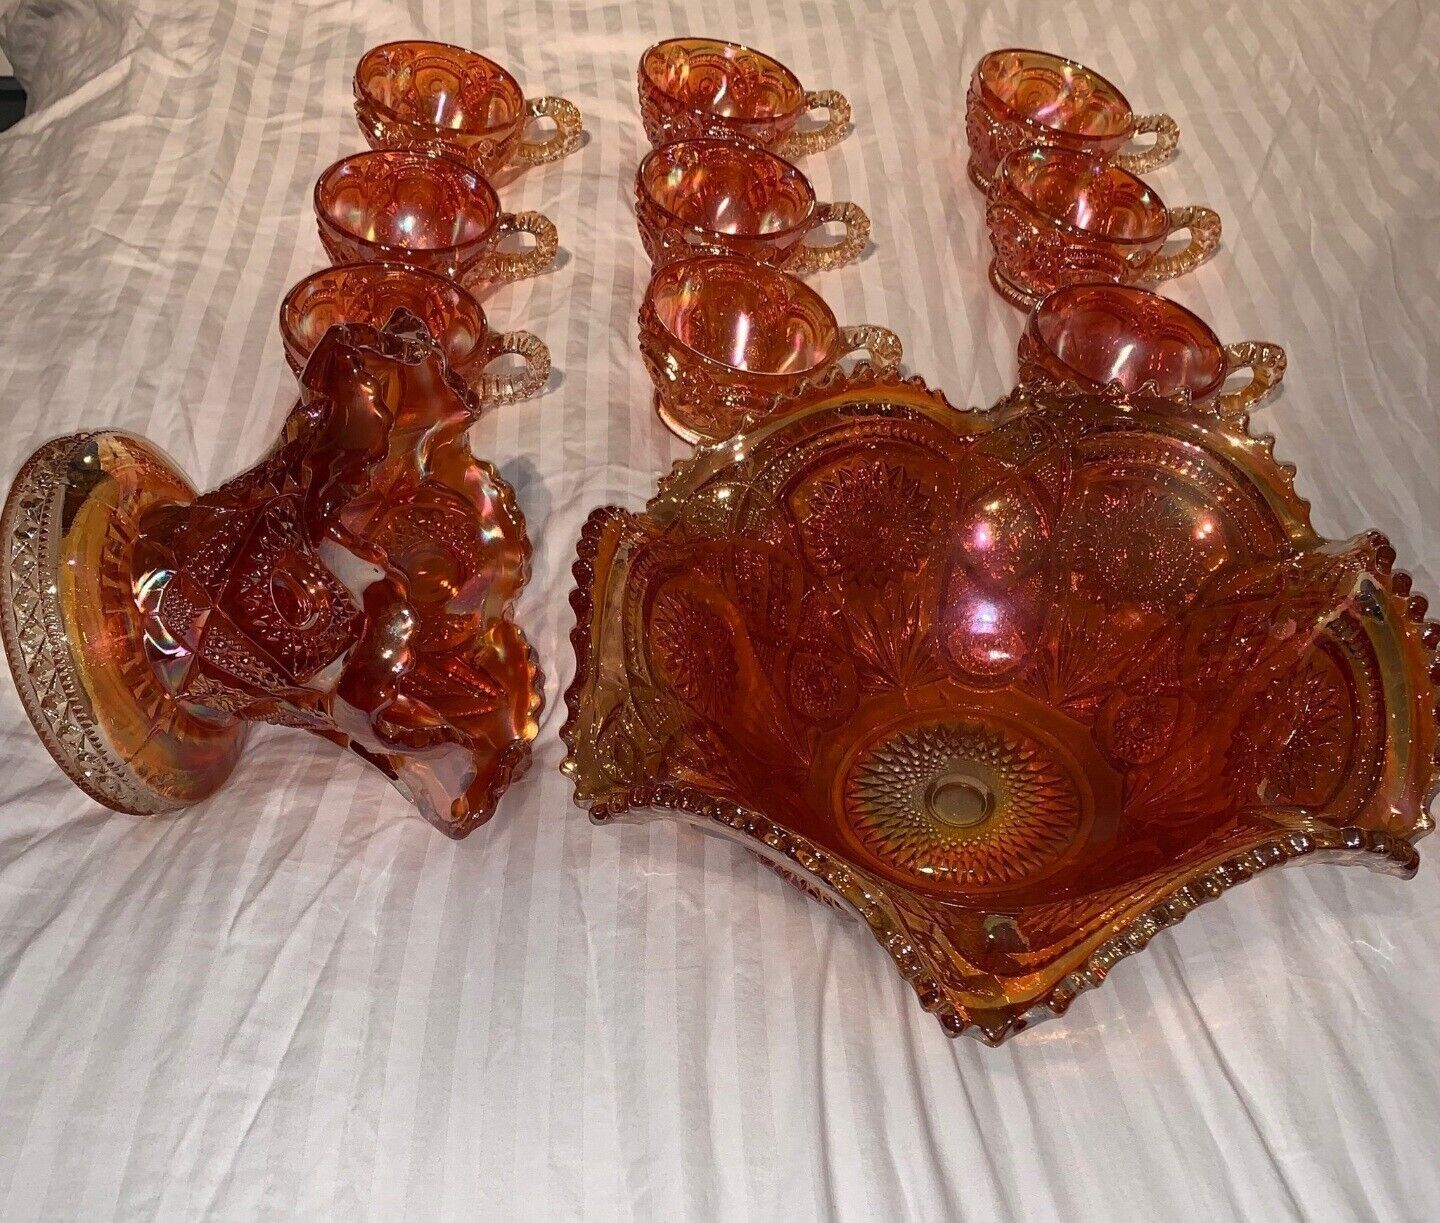 IMPERIAL HOBSTAR vintage marigold carnival glass punch bowl and 9 cups